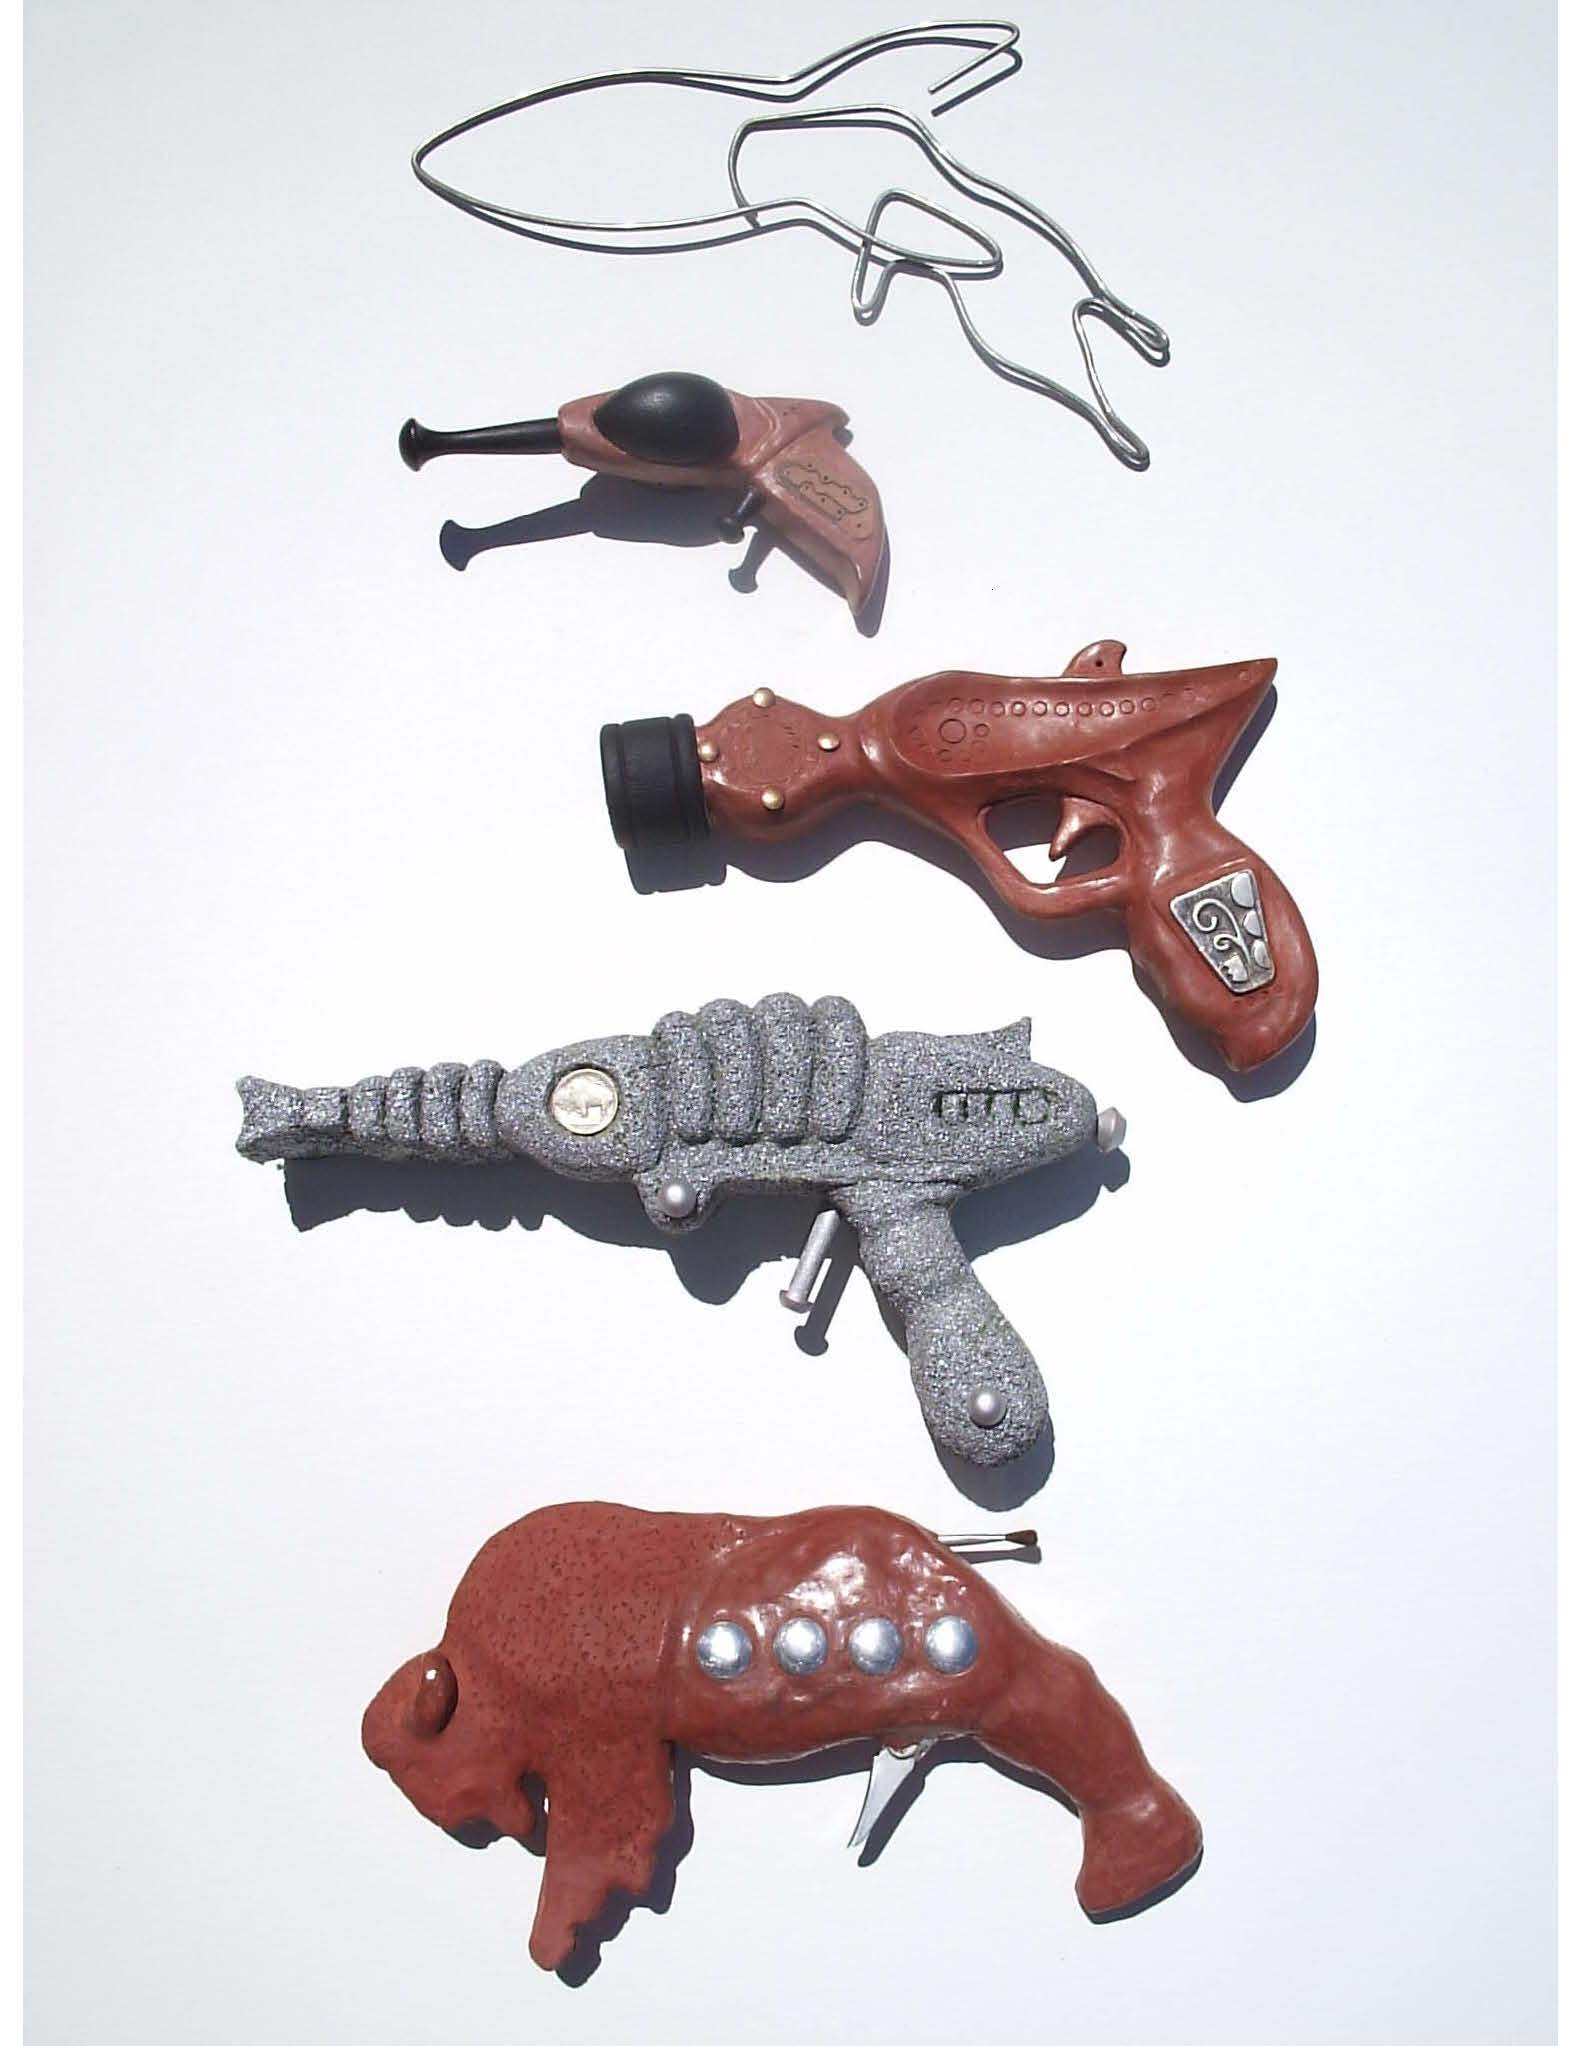 sculptures of guns produced from a variety of recycled materials